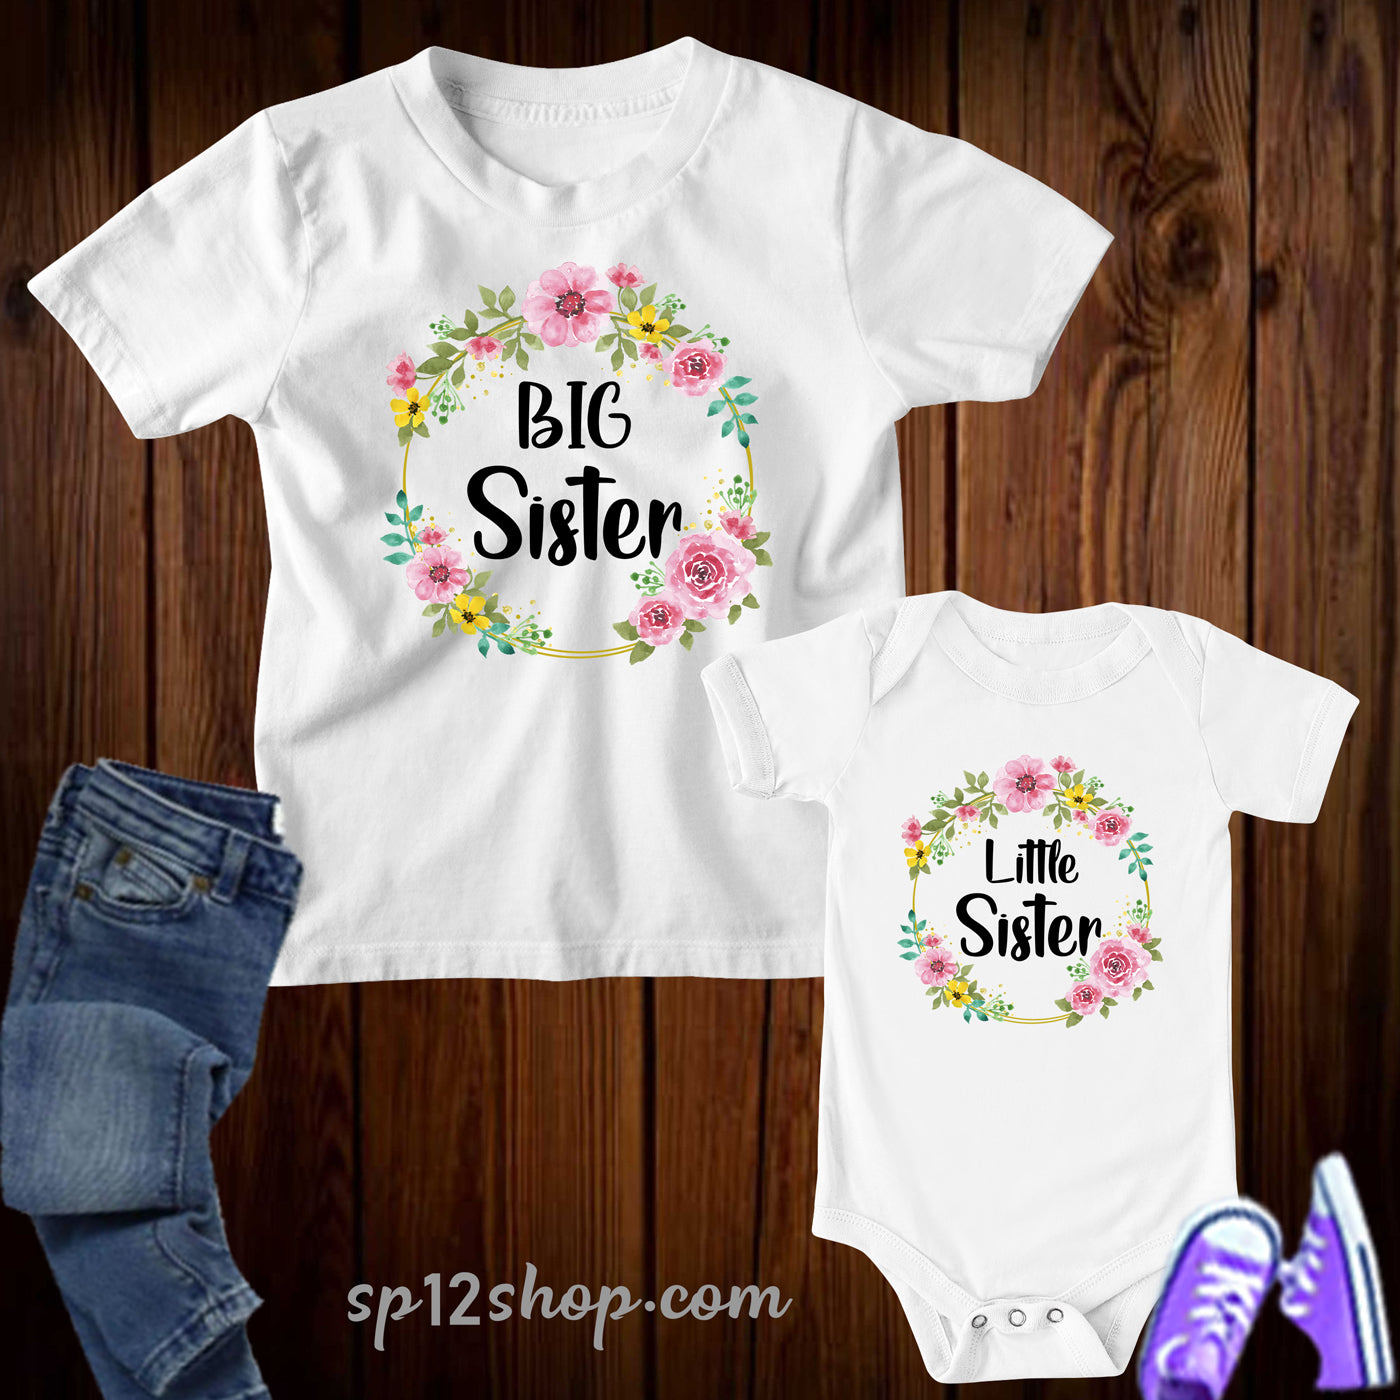 Little Sister And Big Sister Outfits